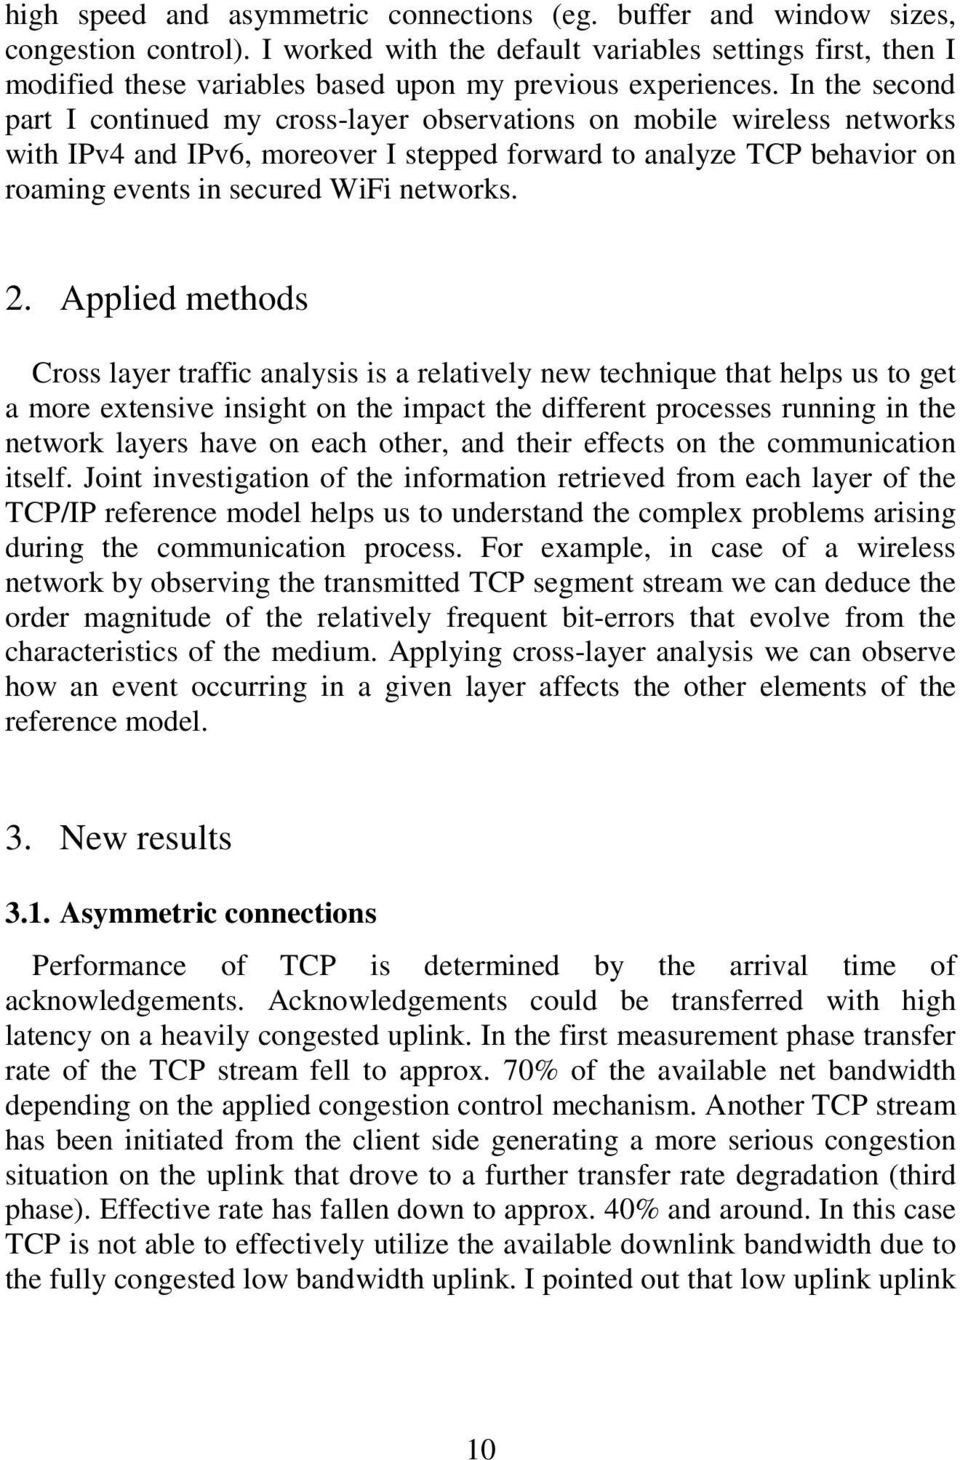 In the second part I continued my cross-layer observations on mobile wireless networks with IPv4 and IPv6, moreover I stepped forward to analyze TCP behavior on roaming events in secured WiFi